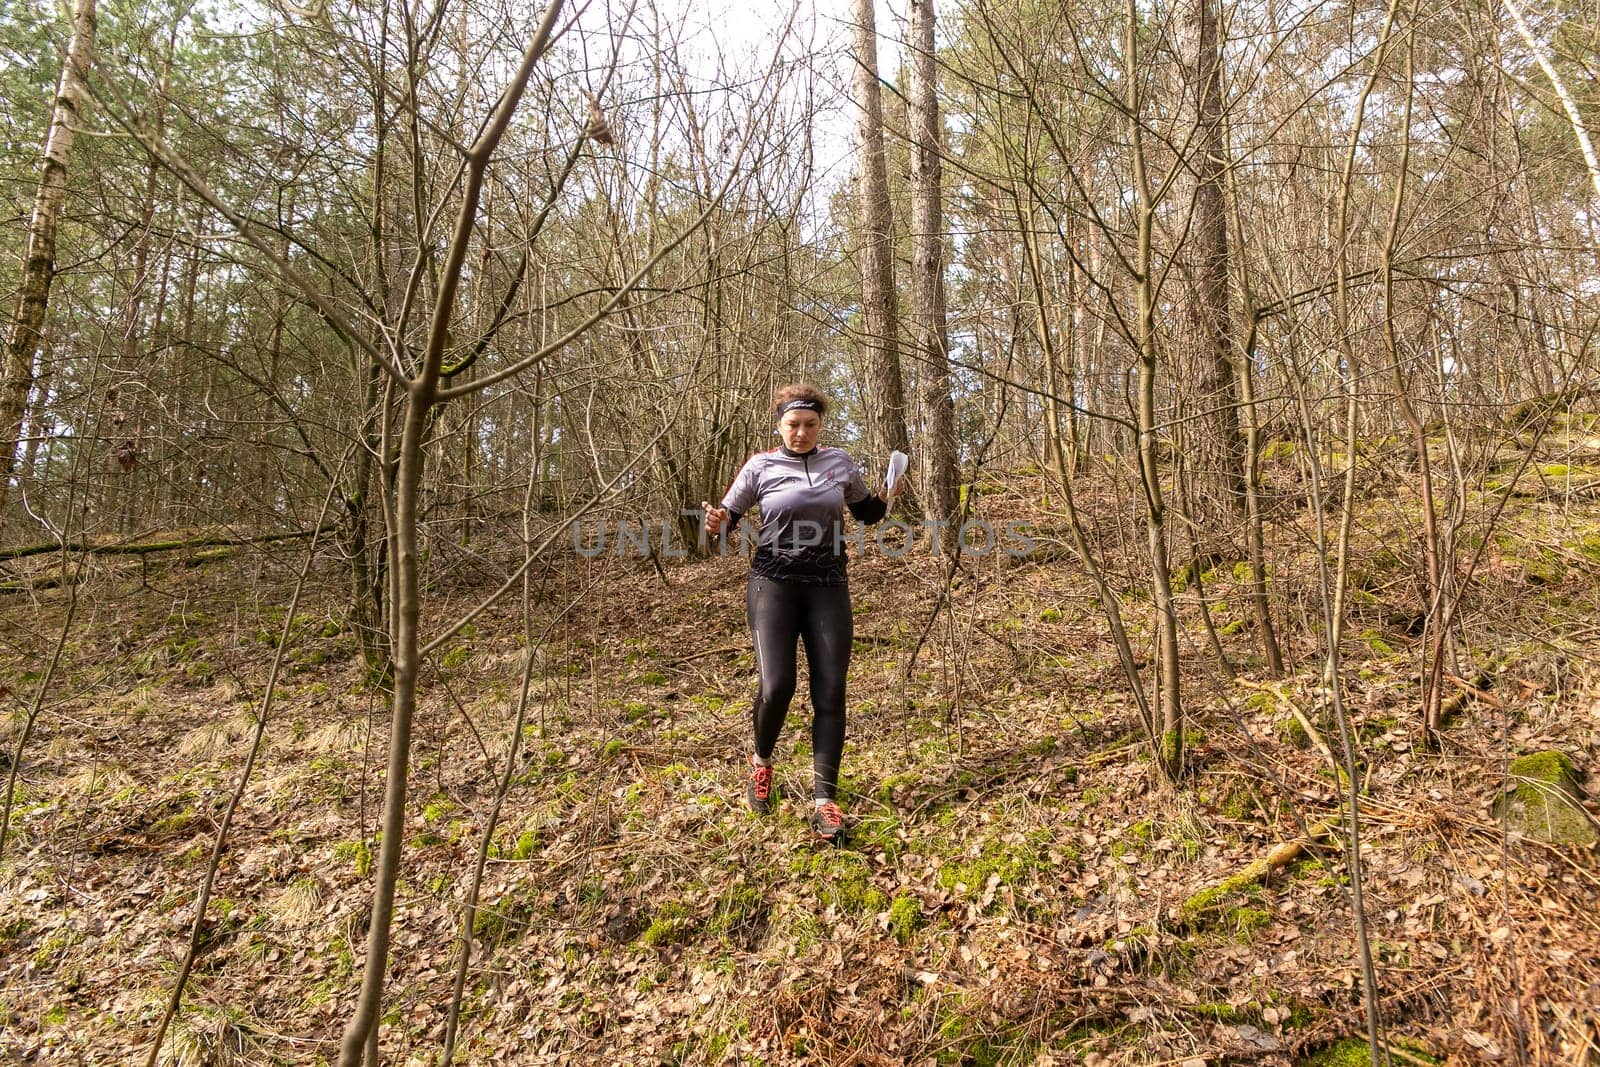 Grodno, Belarus - 25 March, 2023: Strong caucasian young woman wearing sportswear running through a forest during exercise in outdoor orienteering Grodno Forest Day. Belarus, hobby sport.